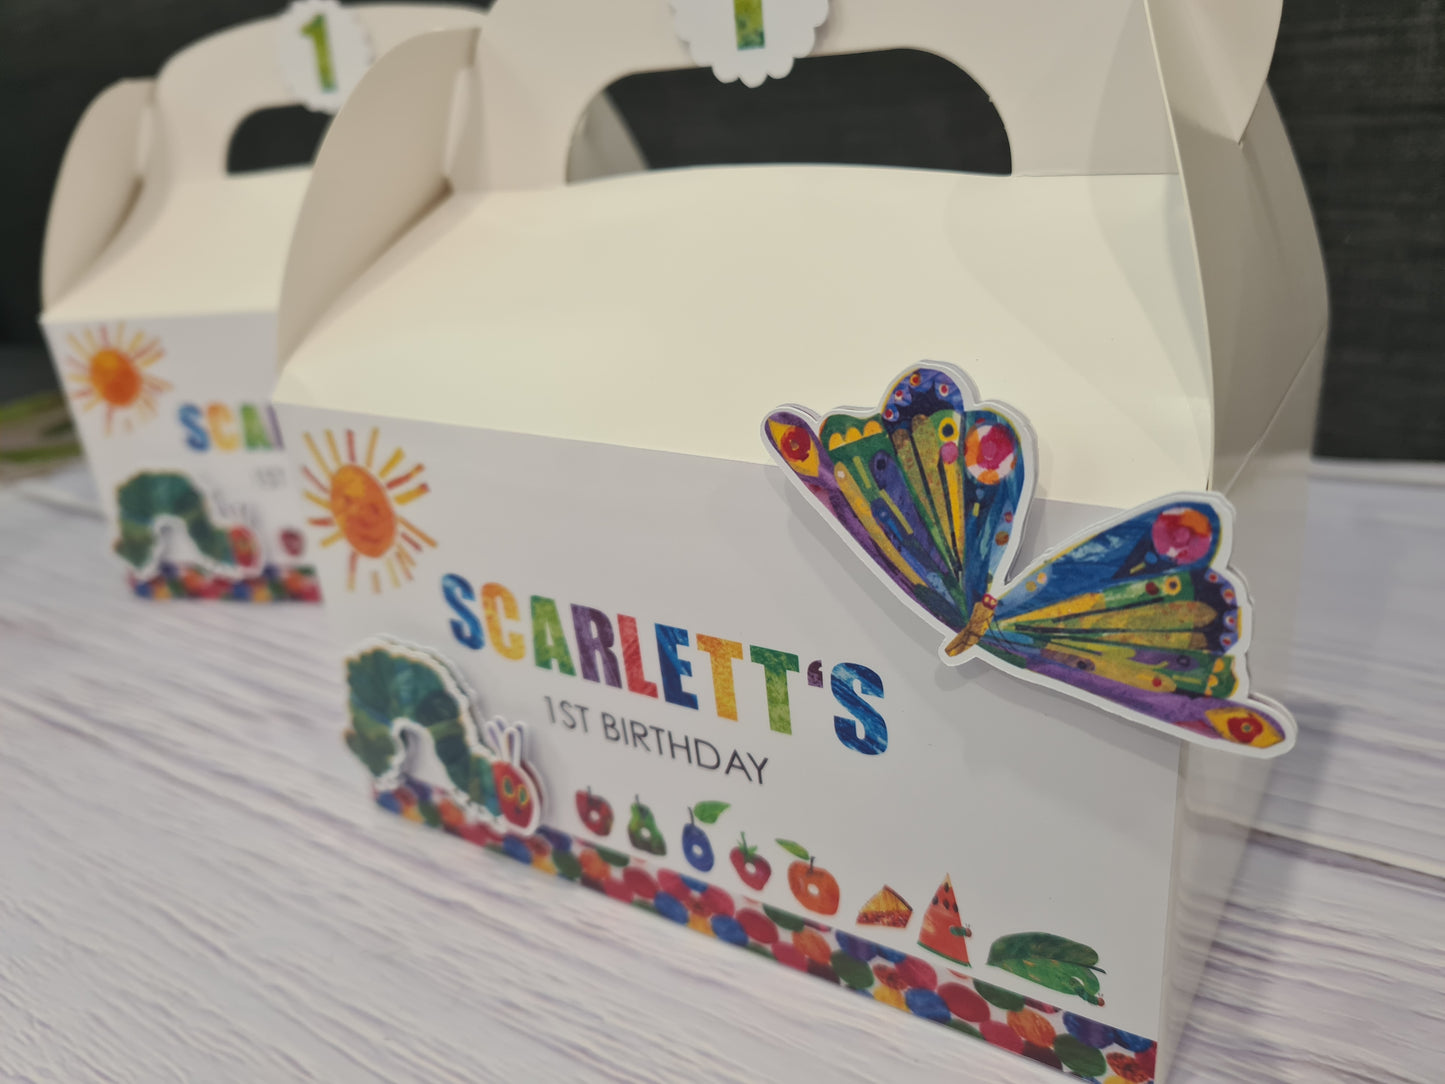 Hungry Caterpillar Party Box